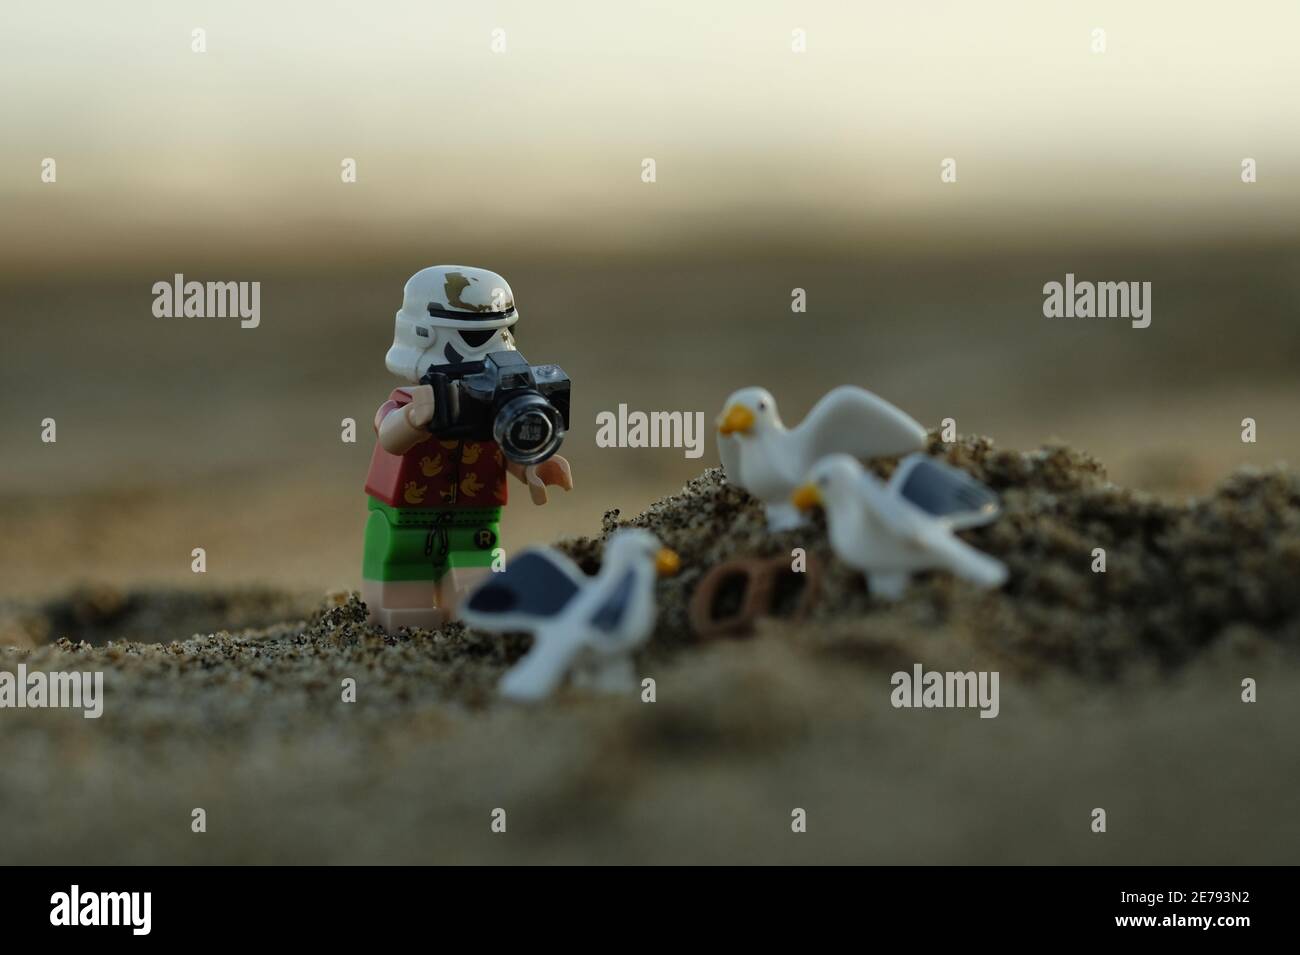 Indonesia, Sep 01 2018. Lego starwars, stormtrooper on vacation, take photo of seagulls. Lego minifigures are manufactured by The Lego Group Stock Photo